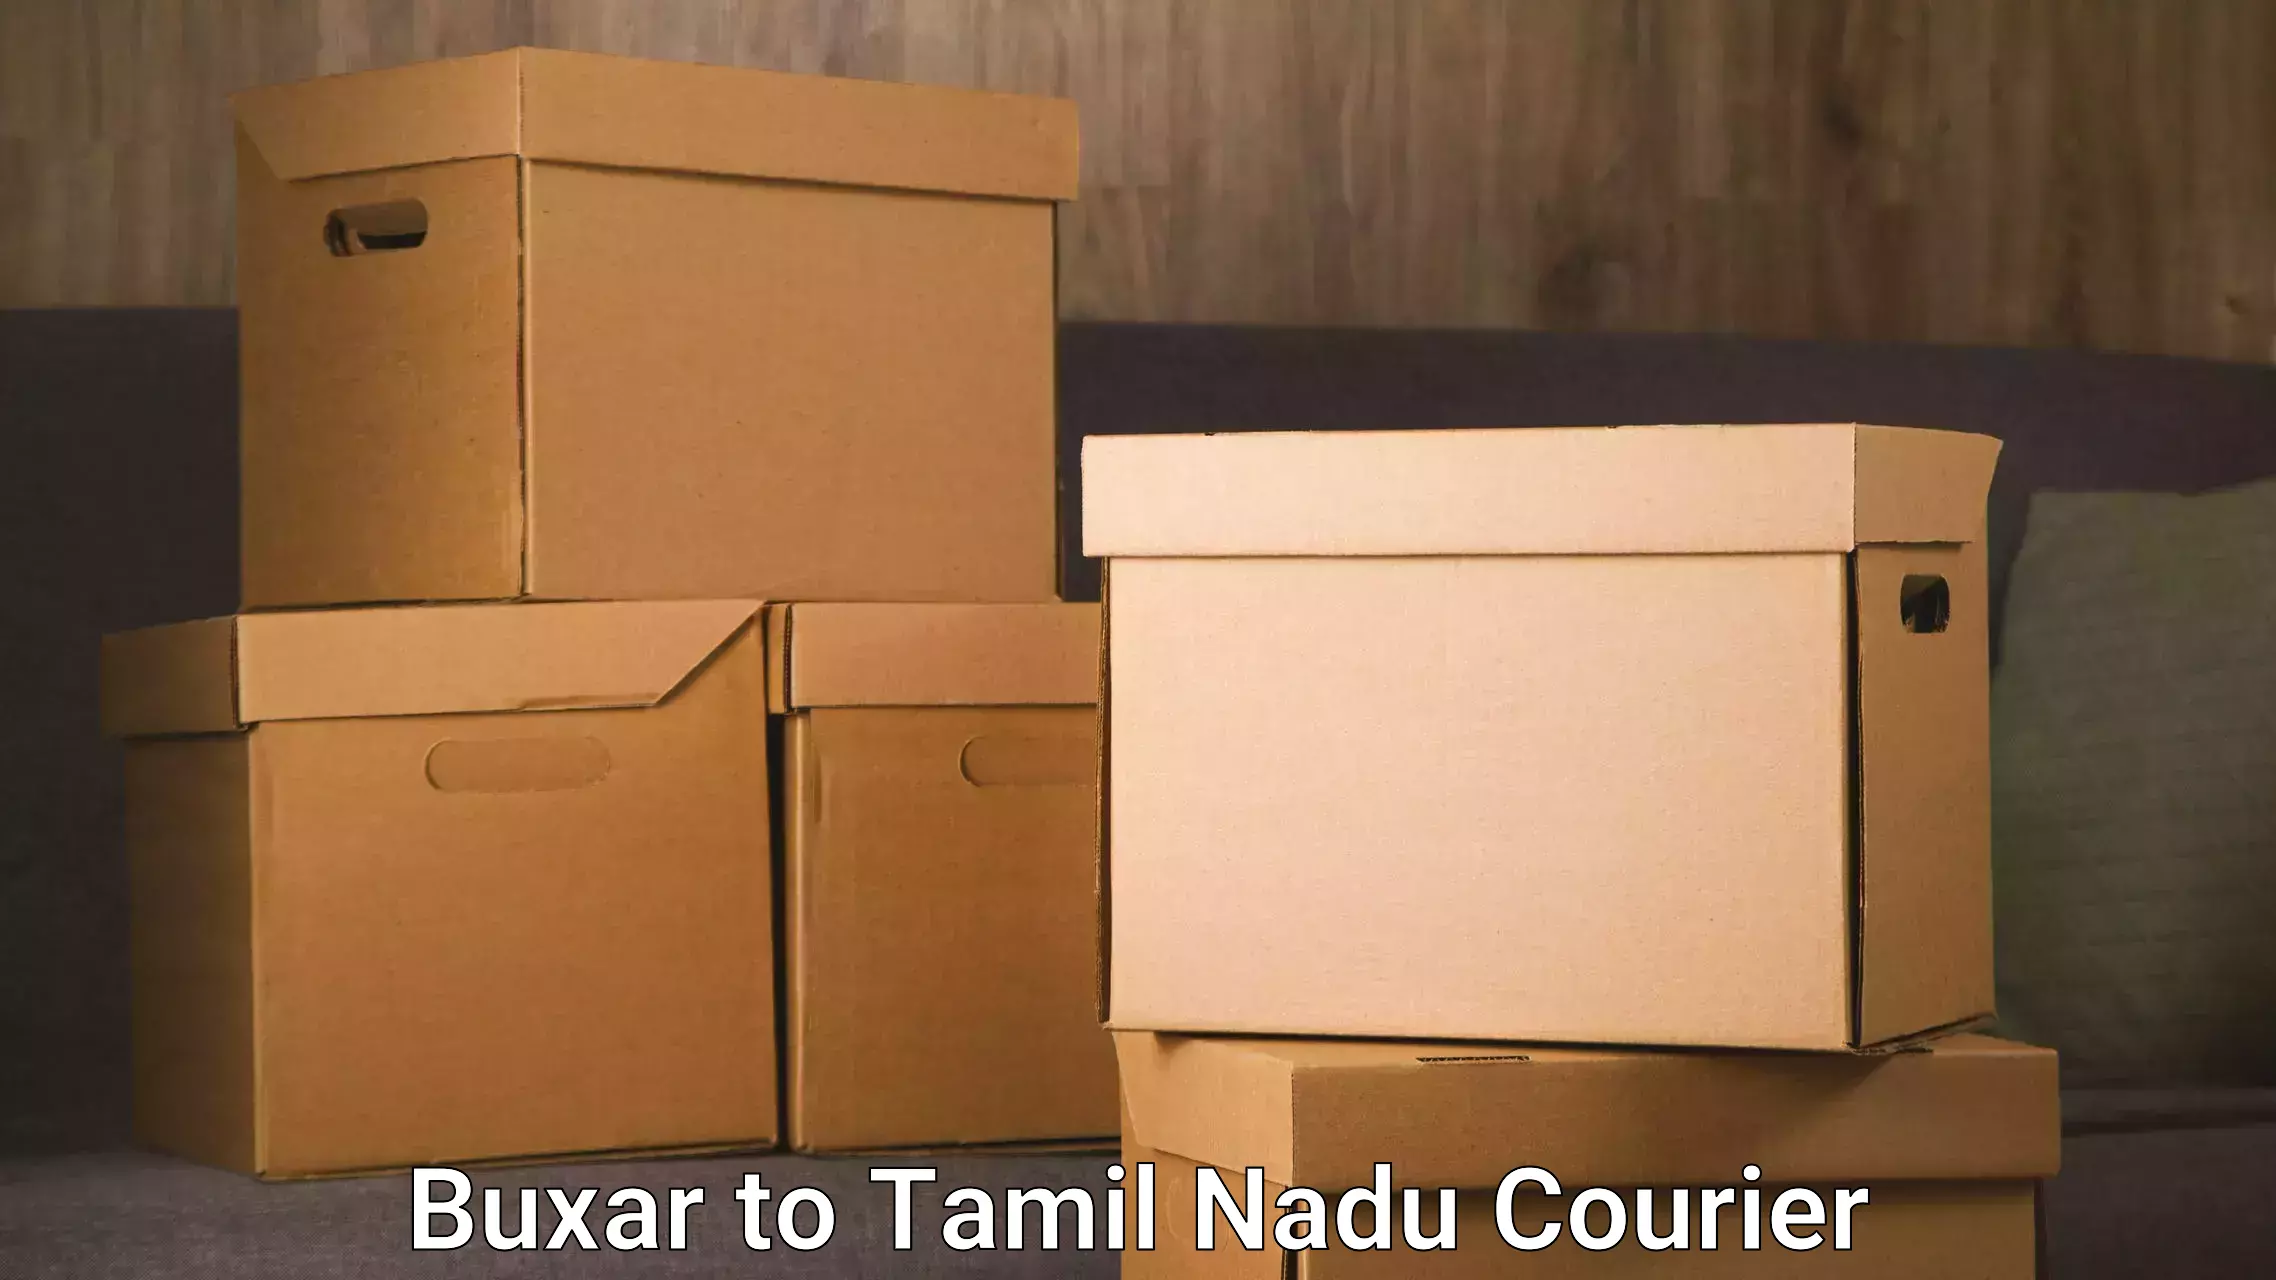 Quality relocation assistance Buxar to Ambattur